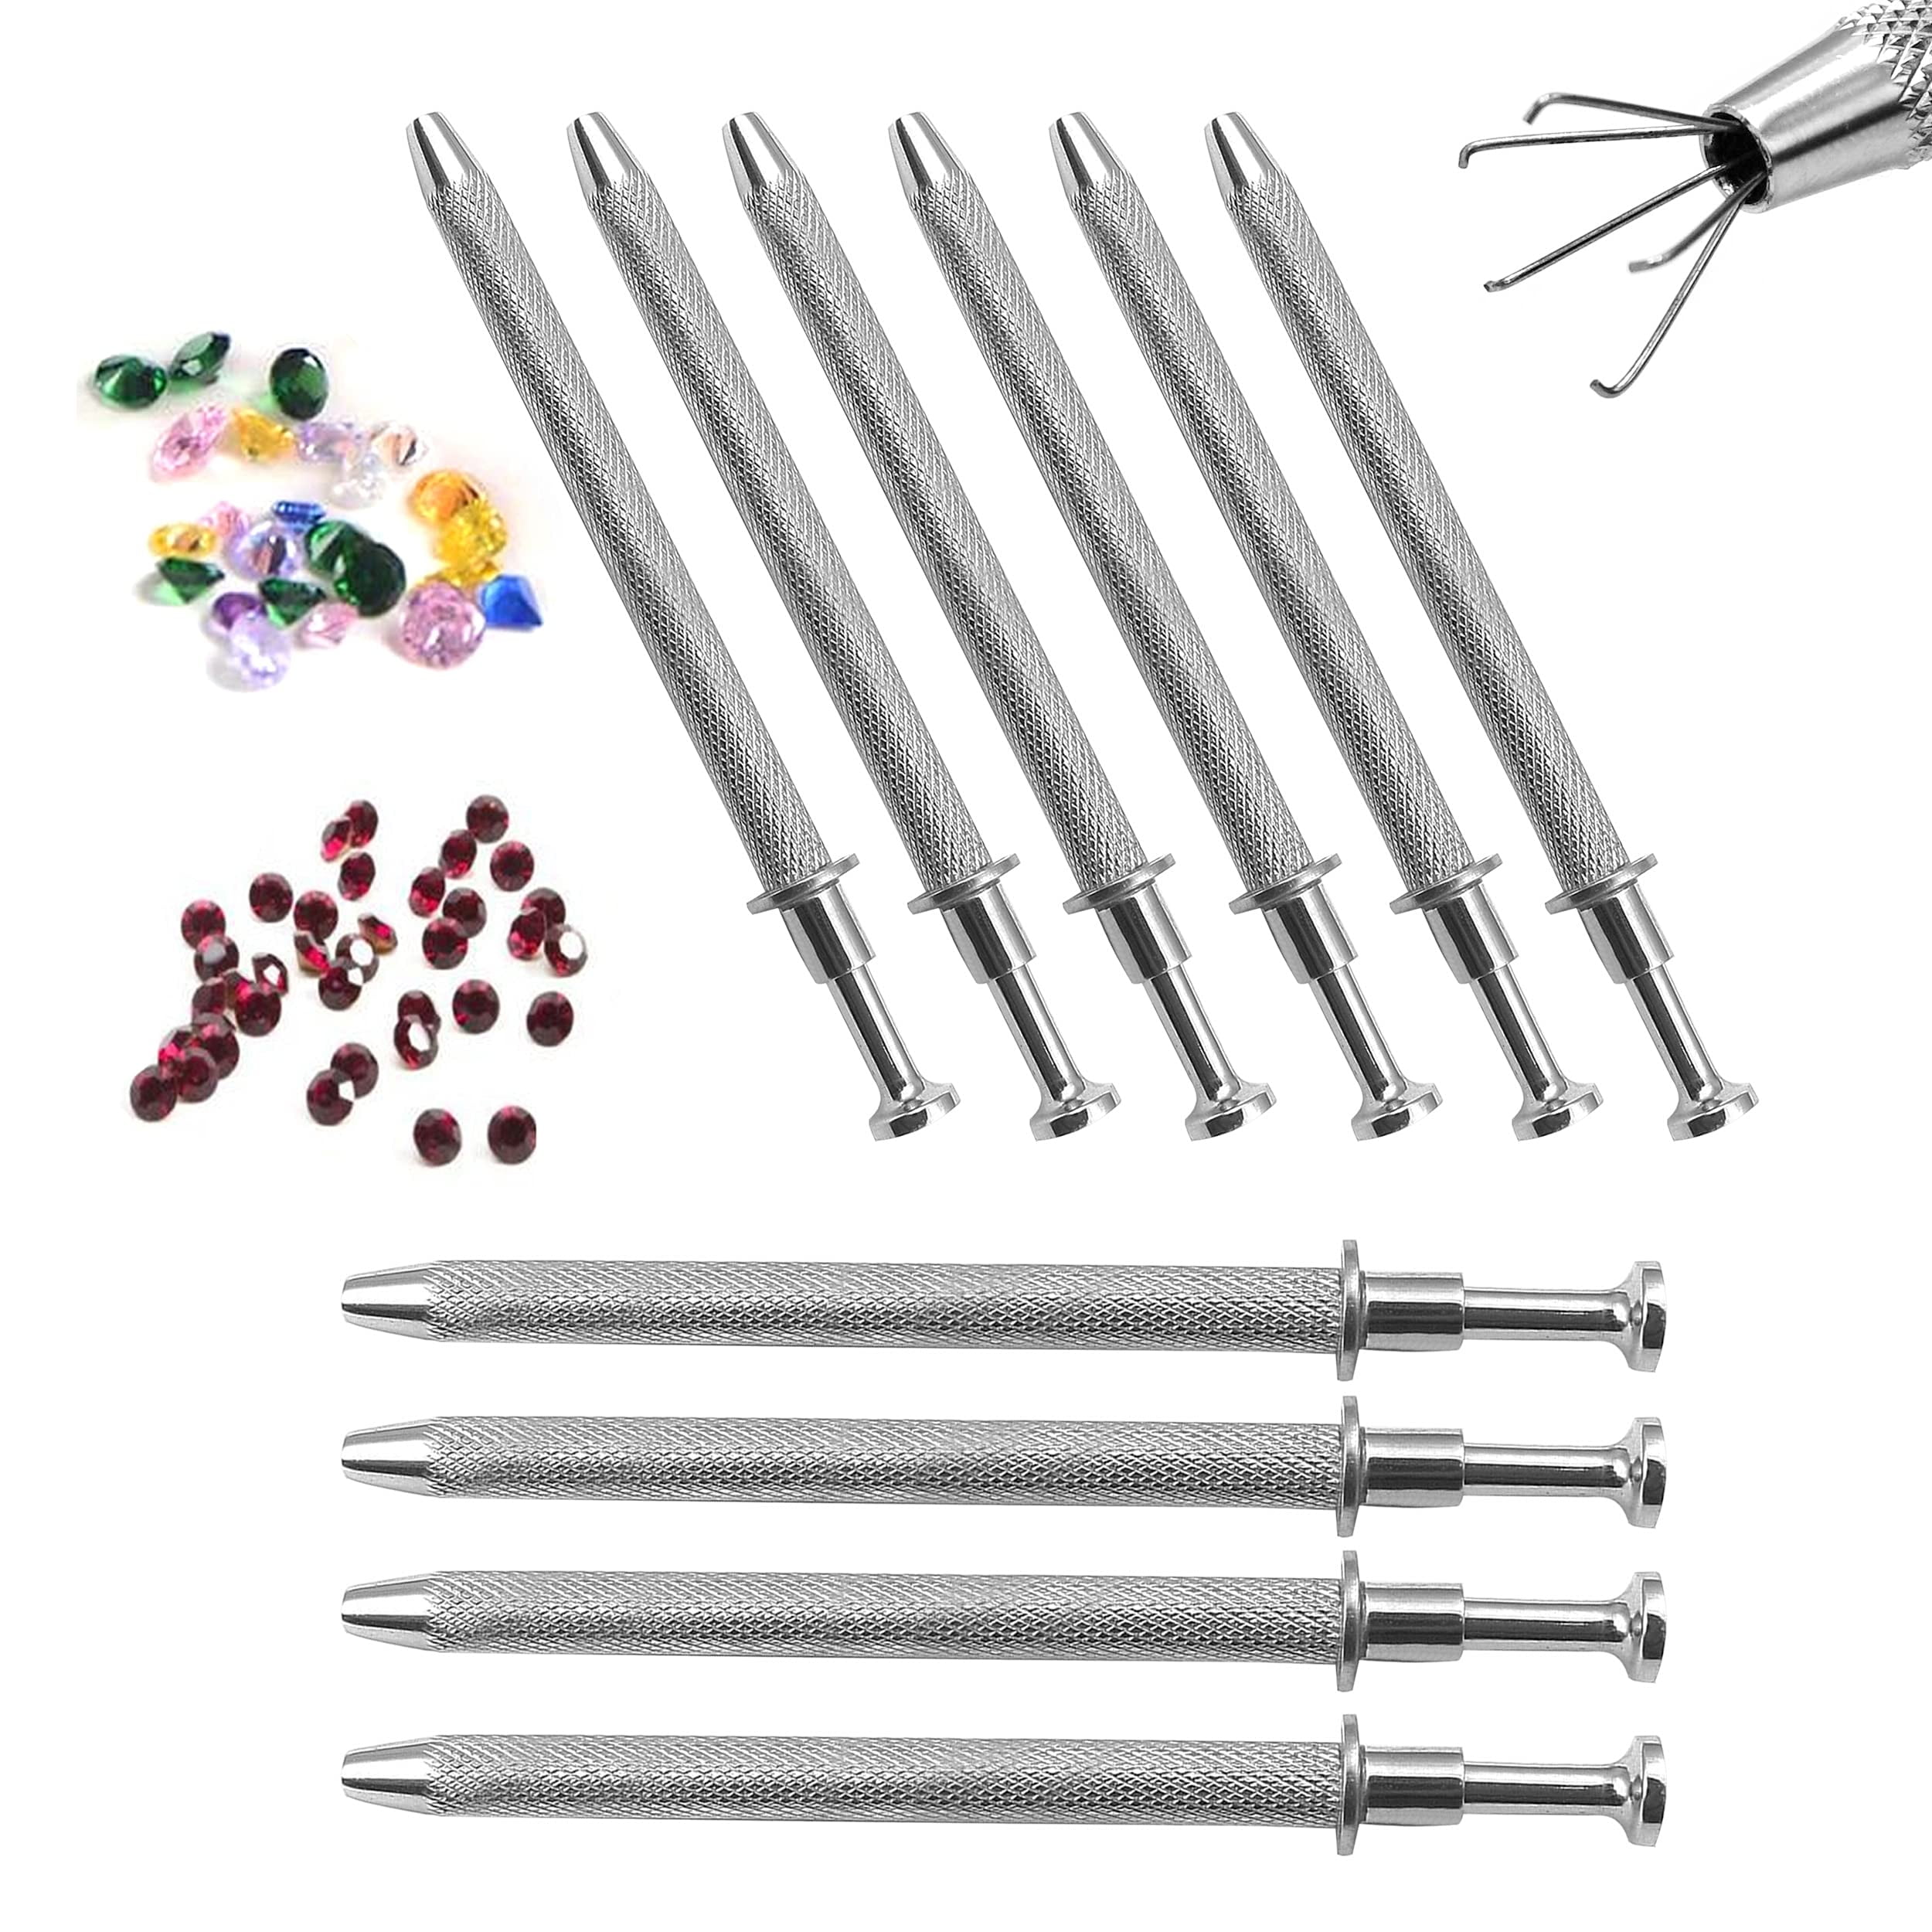 OdontoMed2011 Stainless Steel Double-Sided Hook & Angled Pick Wax & Clay Sculpting Tool